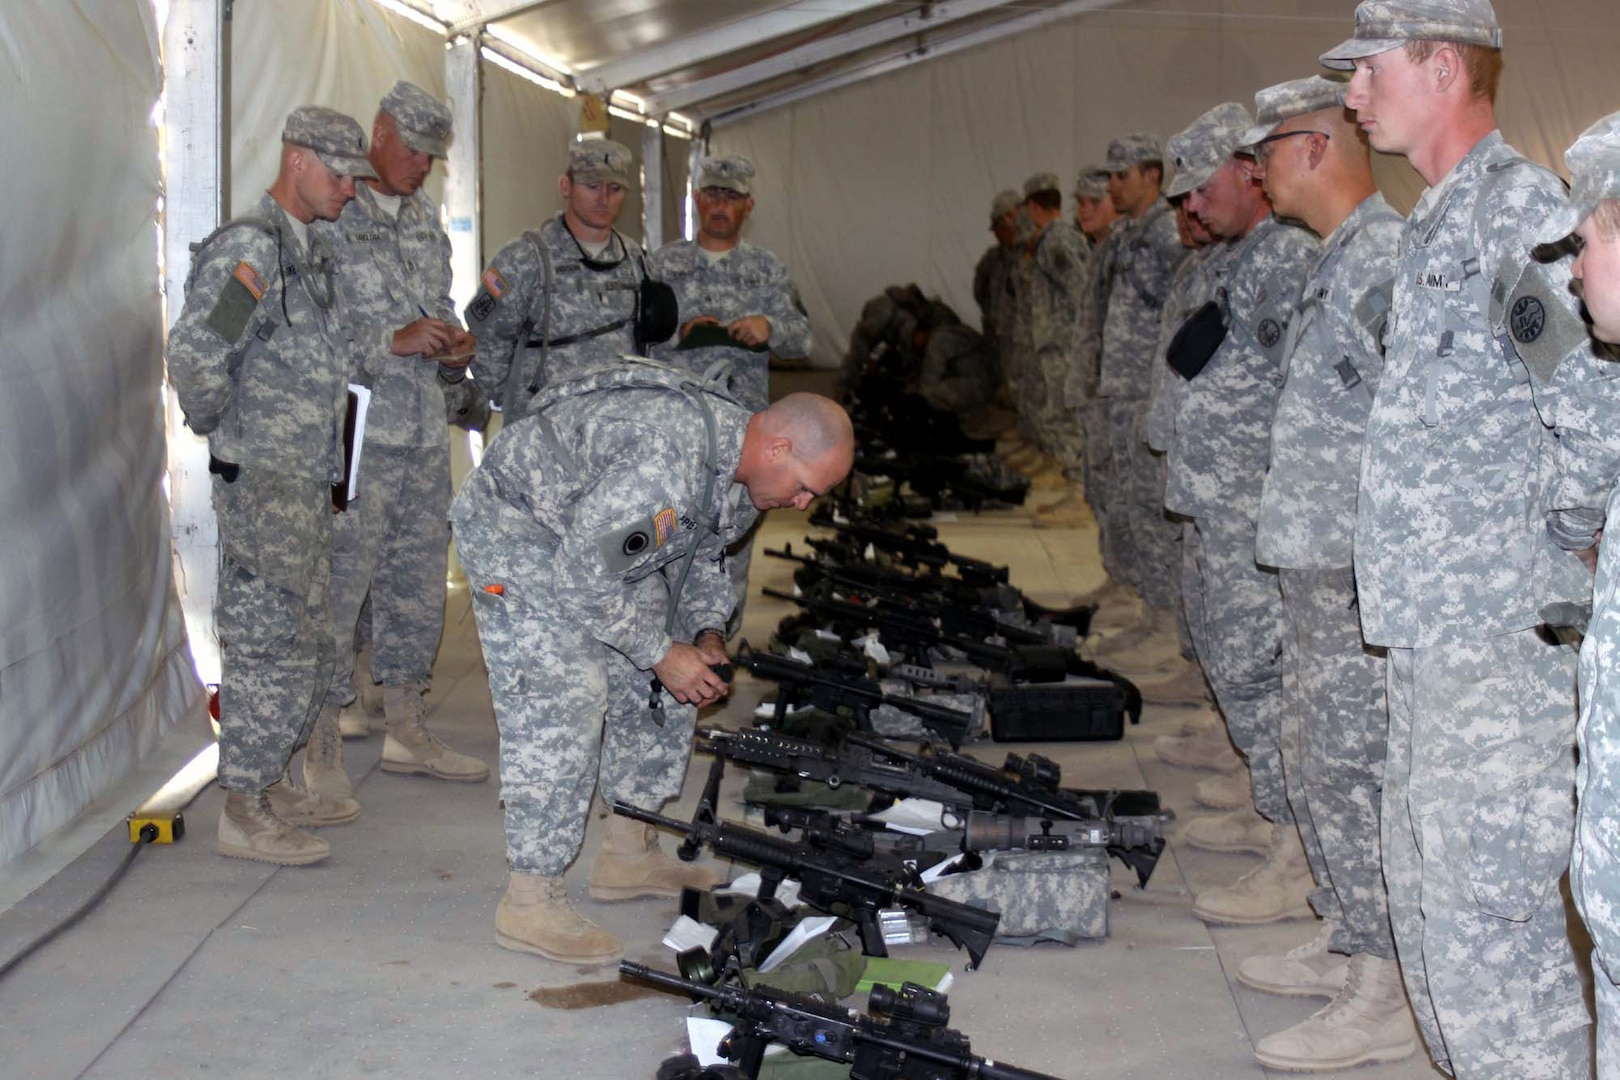 Army Lt. Col. Phil Appleton, commander of the 3rd Battalion, 116th Cavalry Regiment, 77th Sustainment Brigade, 310th Expeditionary Sustainment Command, conducts a pre-combat inspection of weapons of Company Foxtrot, 3rd Battalion. Pre-combat checks and pre-combat inspections are critical elements in the fight against complacency.